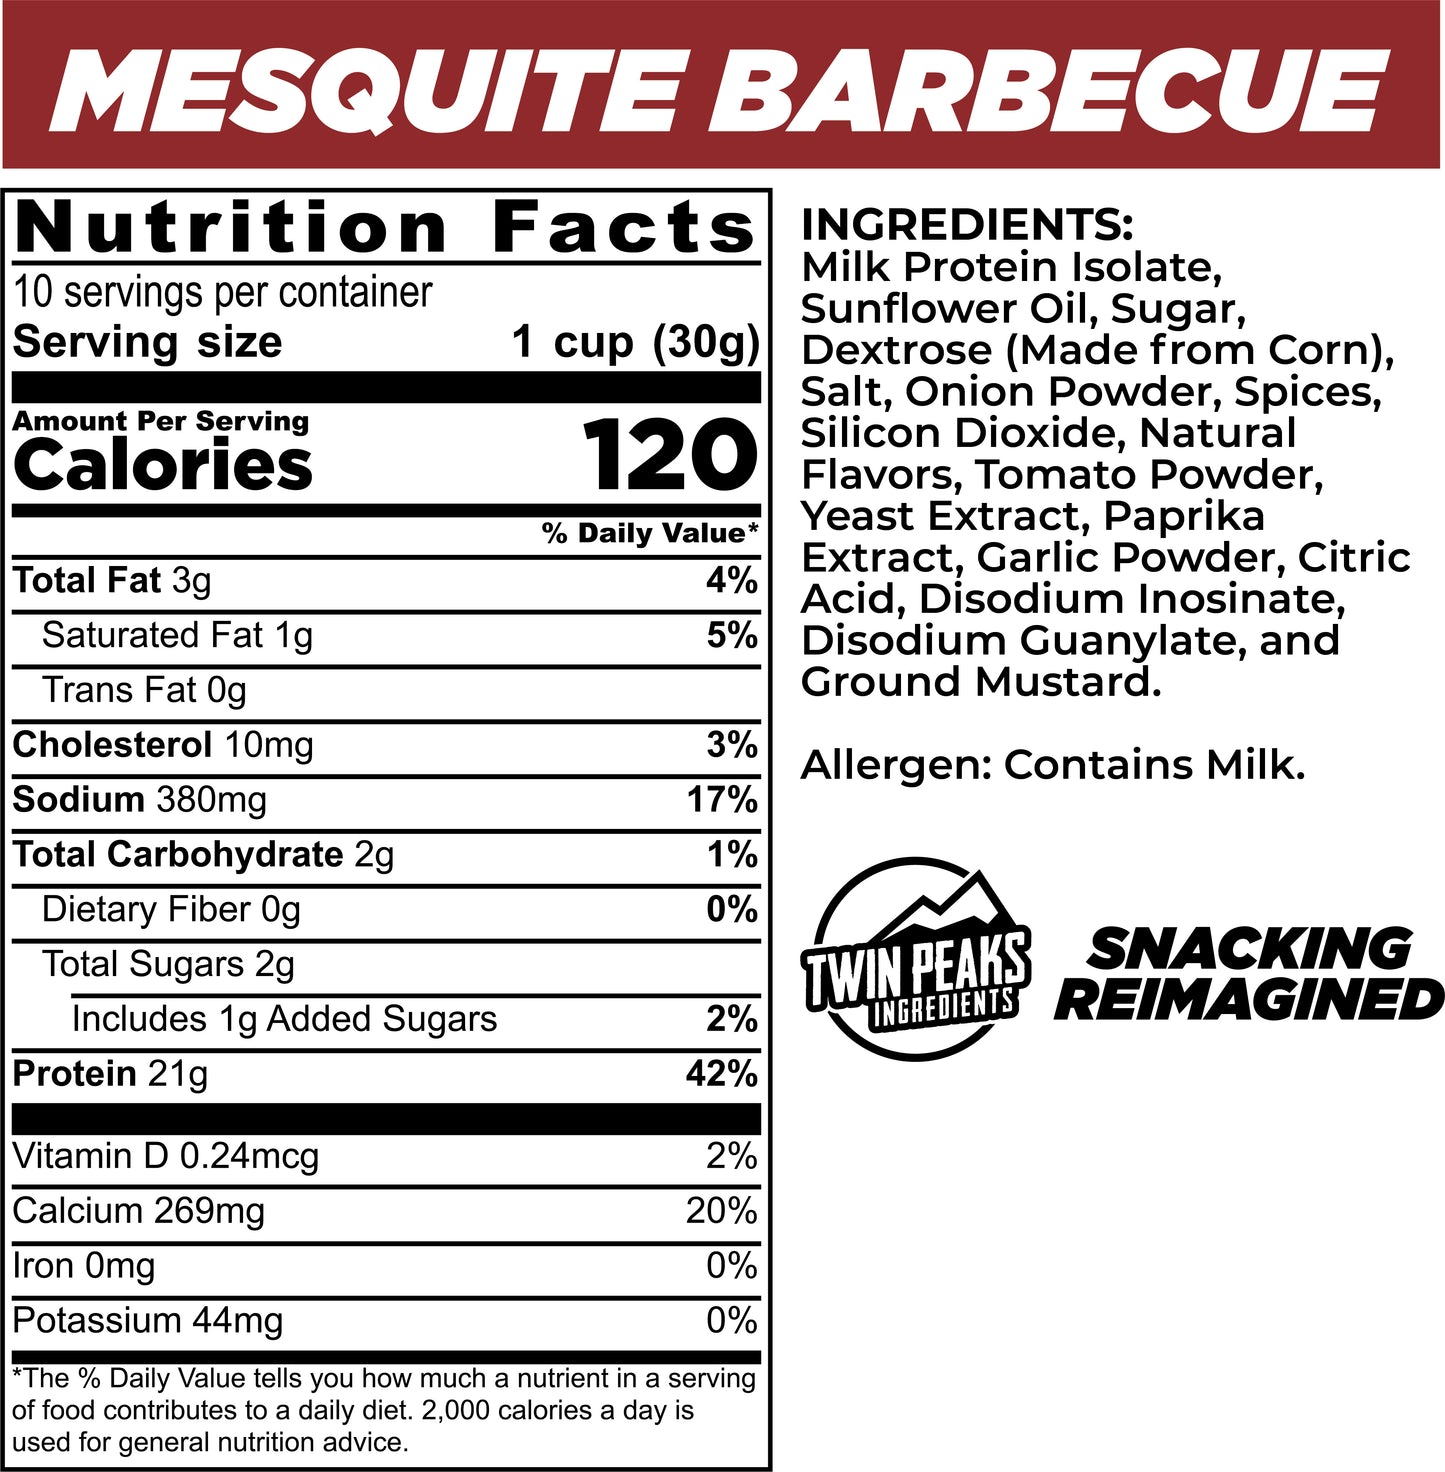 Mesquite BBQ Nutrition Facts & Ingredients